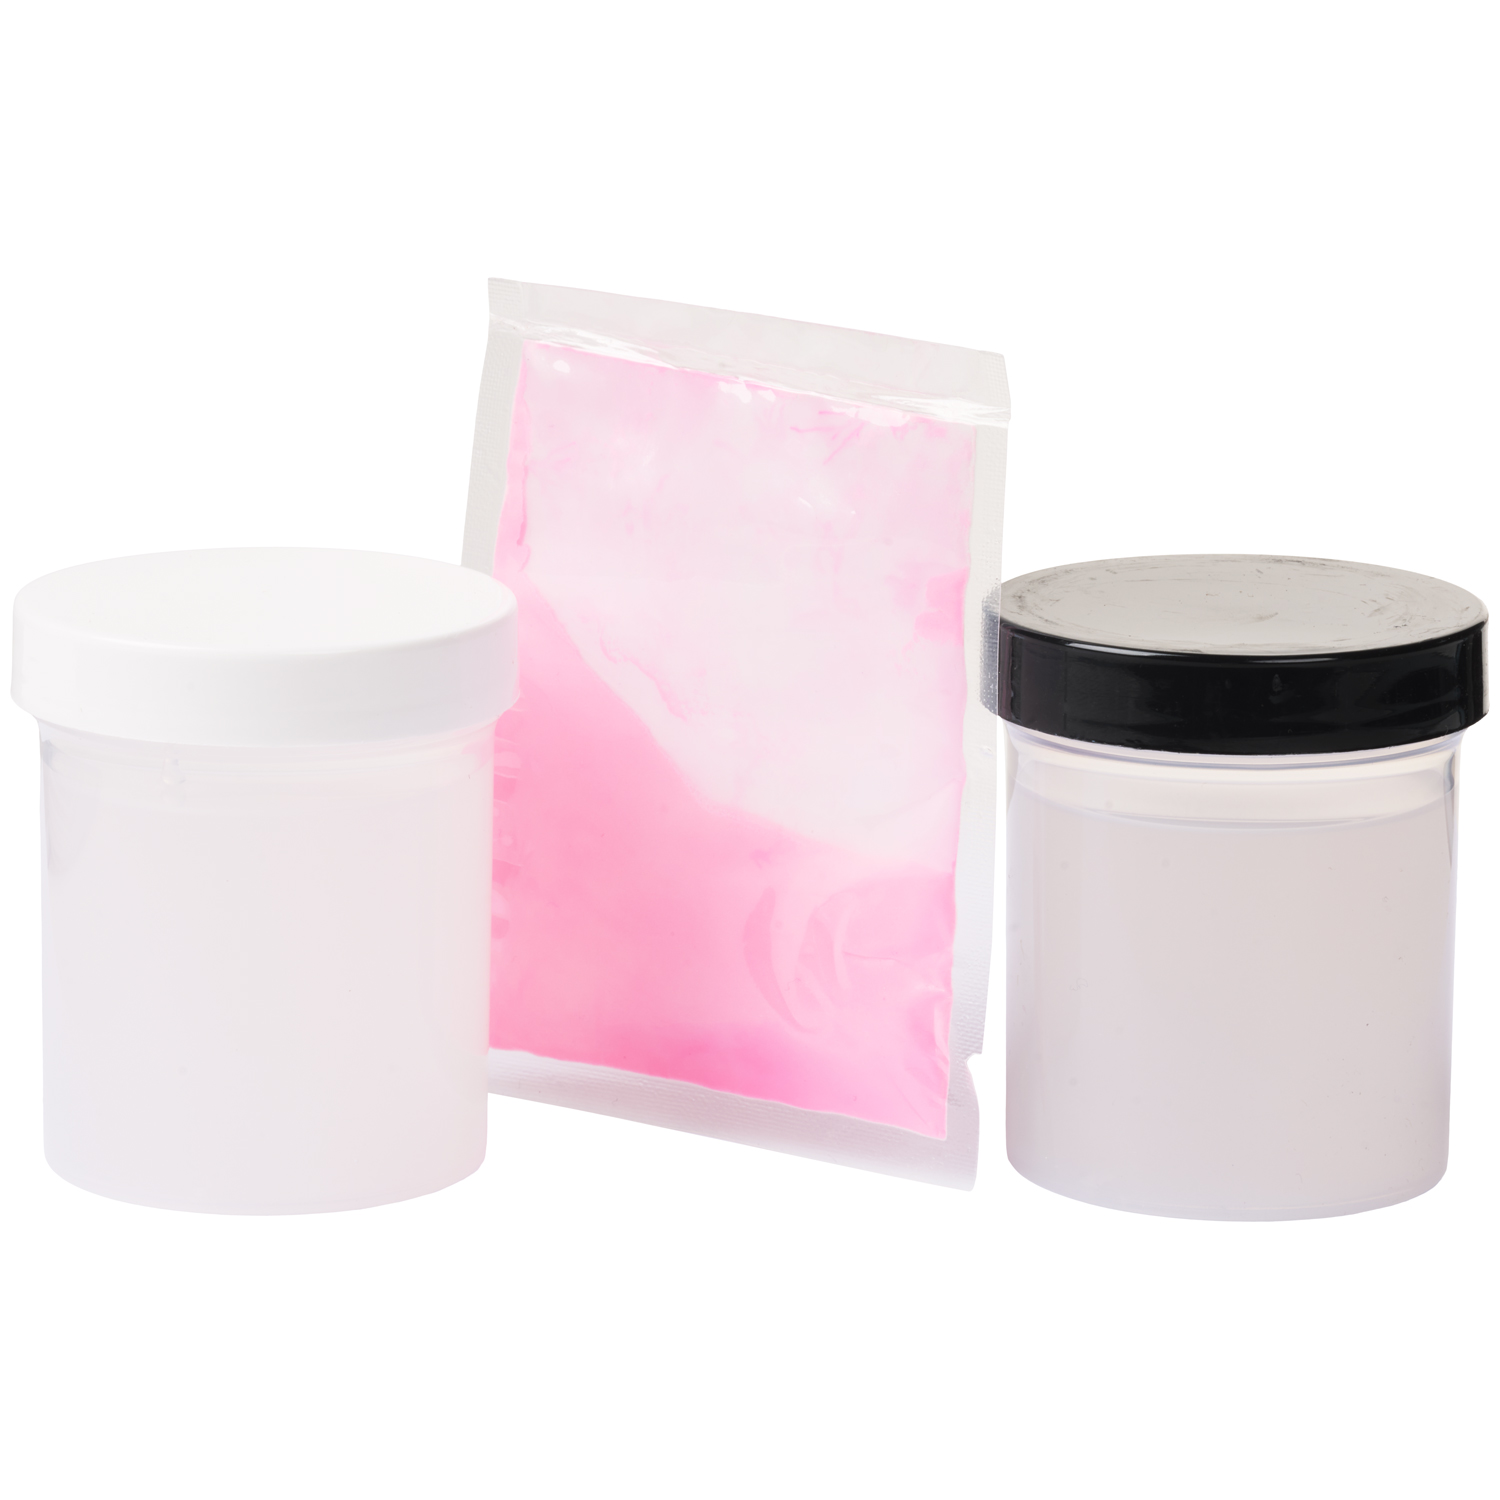 Clone-A-Willy Glow in The Dark Hot Pink Silikone Refill - Pink